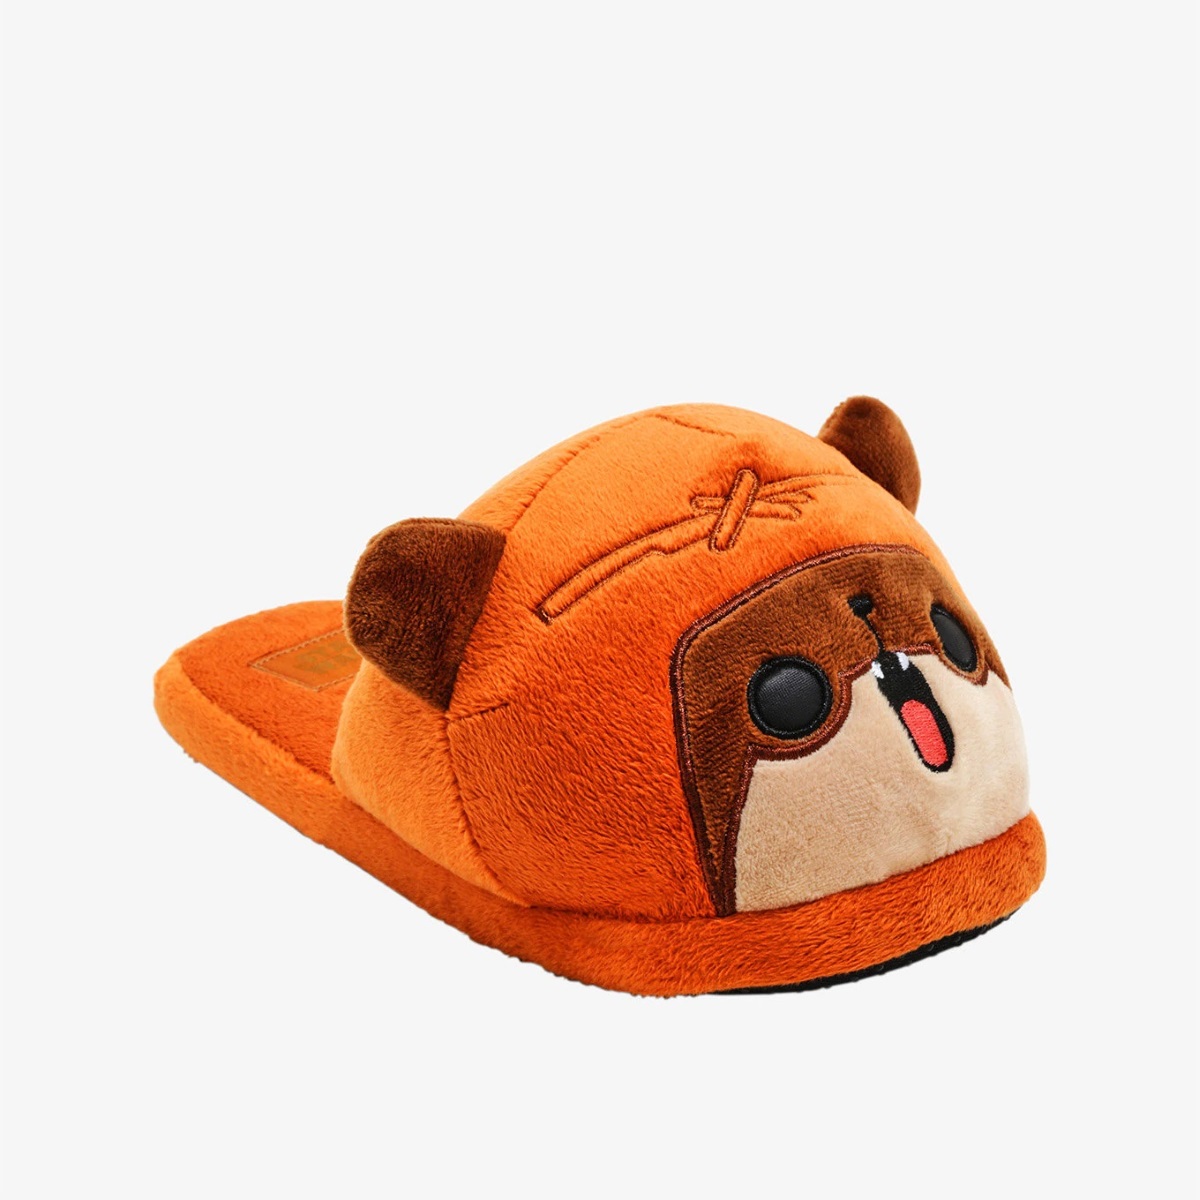 Star Wars Wicket Ewok Slippers at Box Lunch